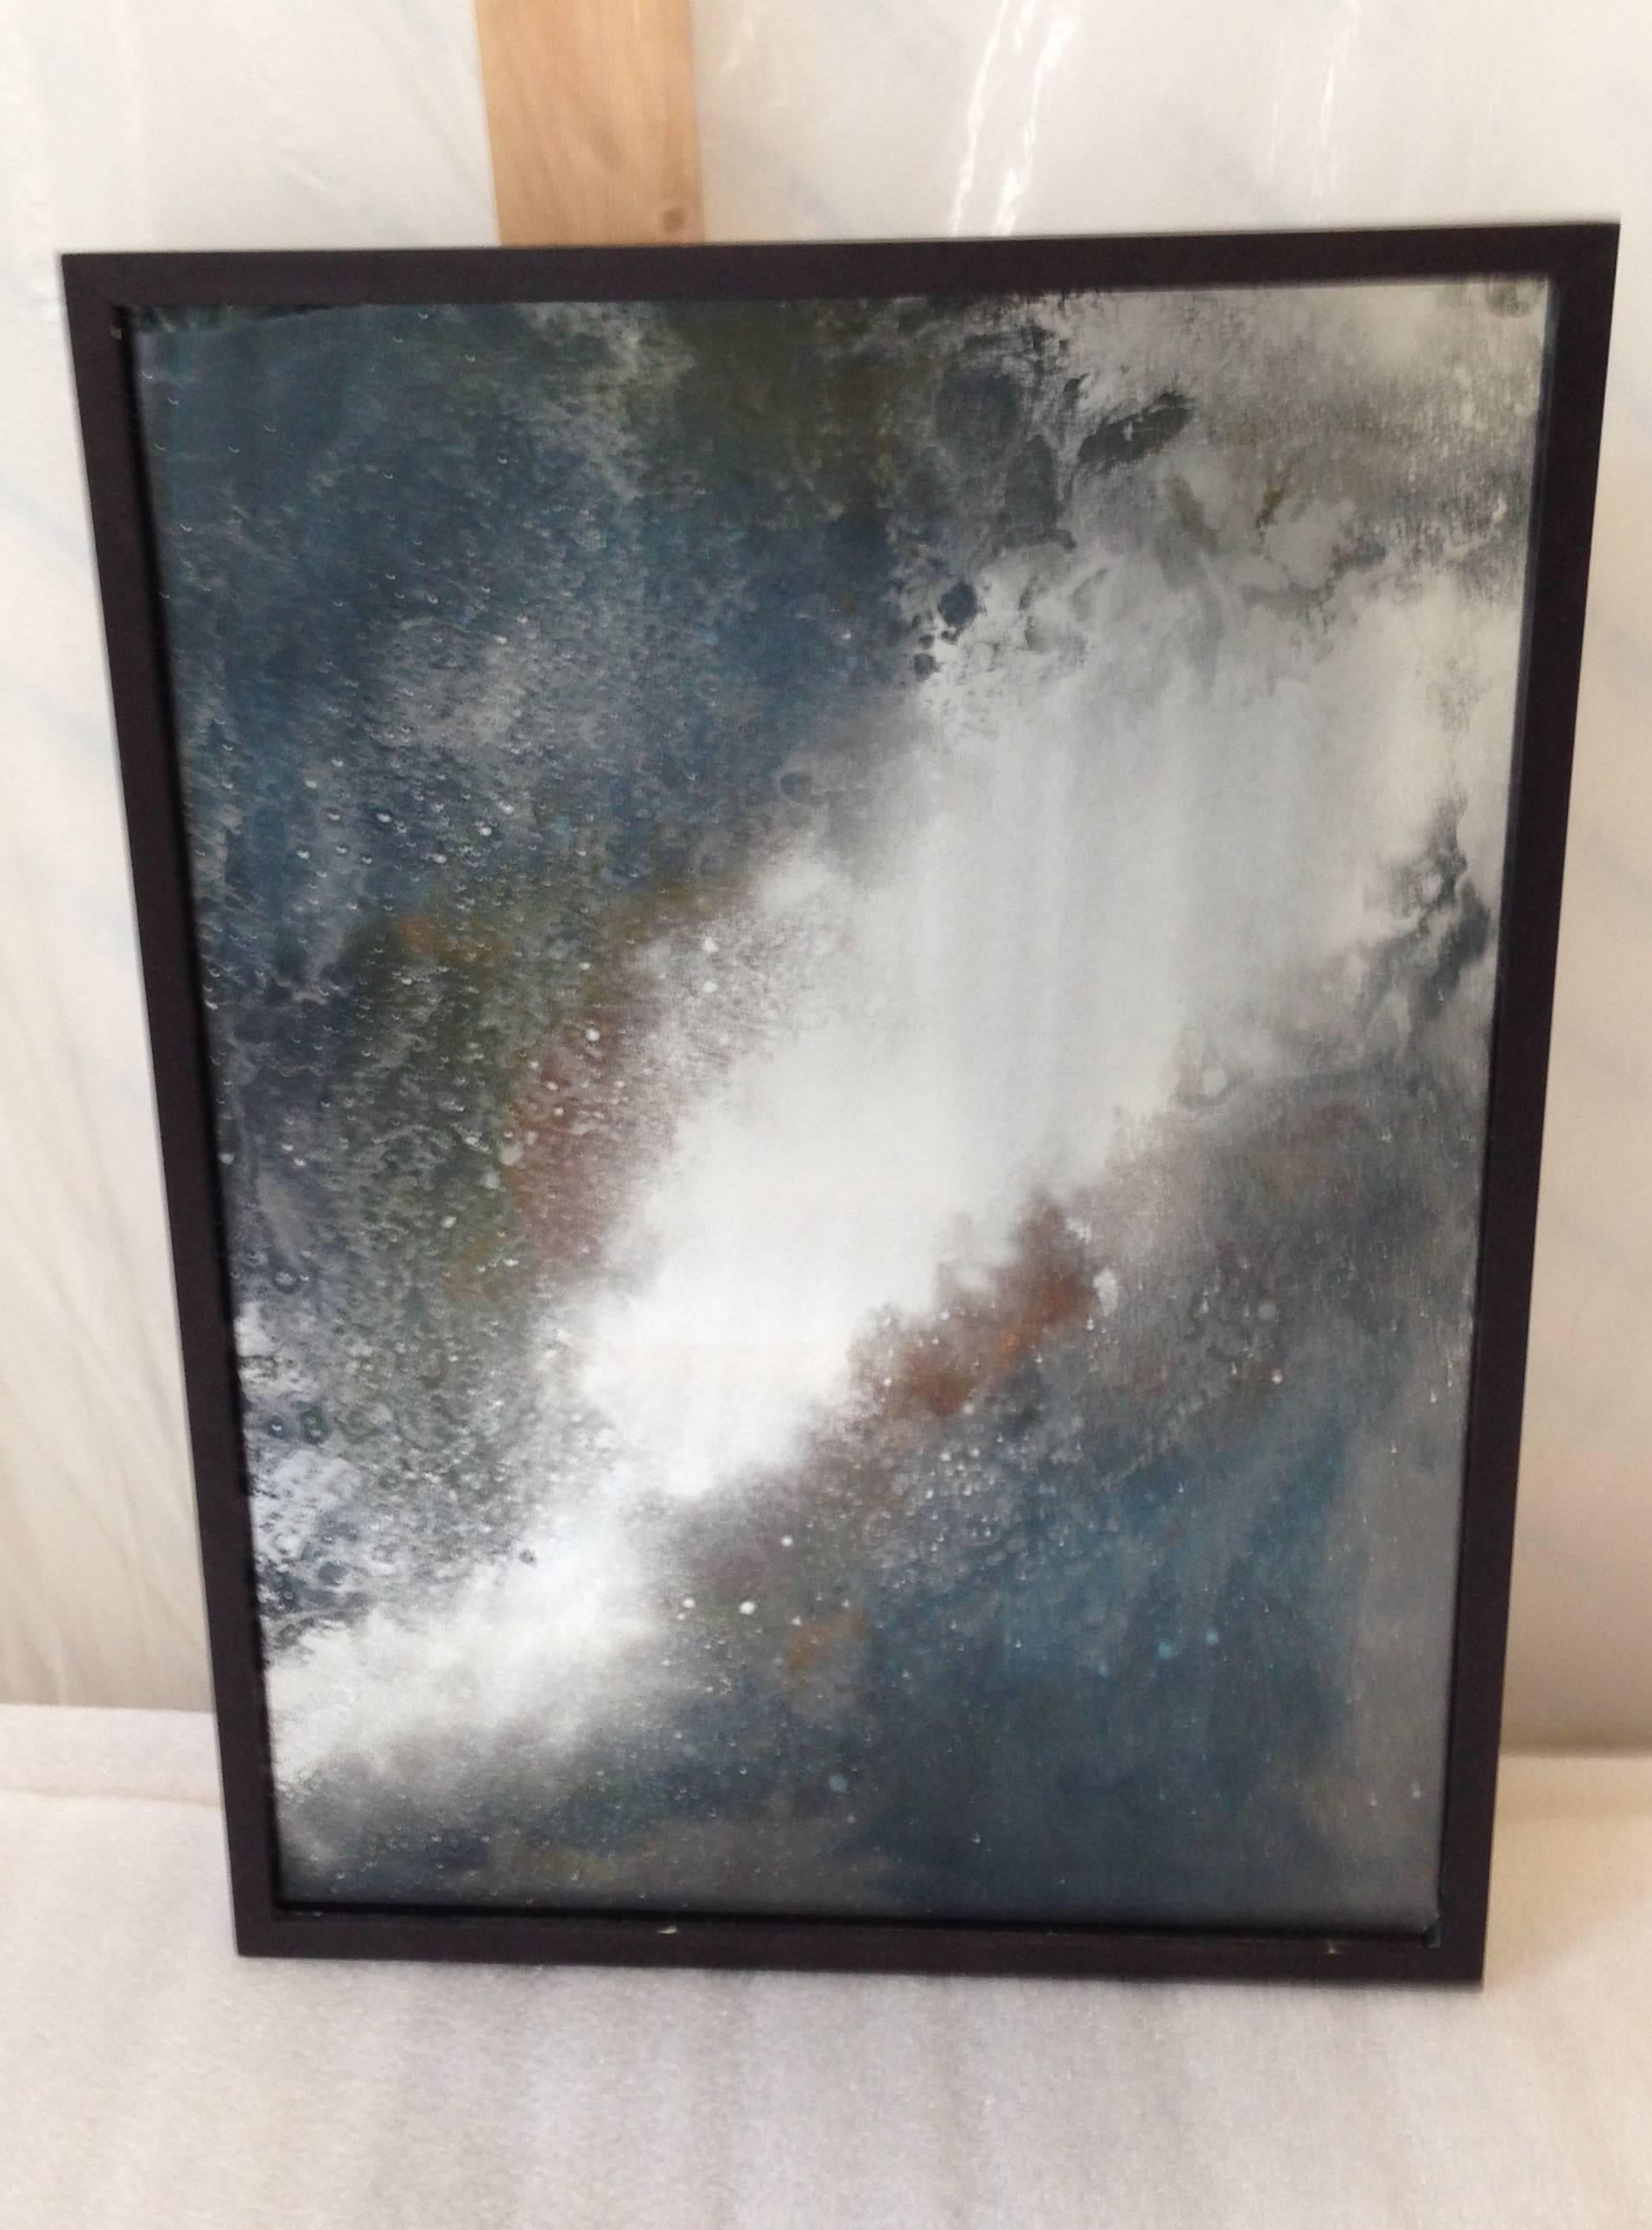 Orion shows a dramatic triptych of custom made nebula mirrors, with clouds of silvering flowing across the expanse of glass, layered with coloured translucent resin and further silvering, giving a sense of shifting depth to the piece. 

There are